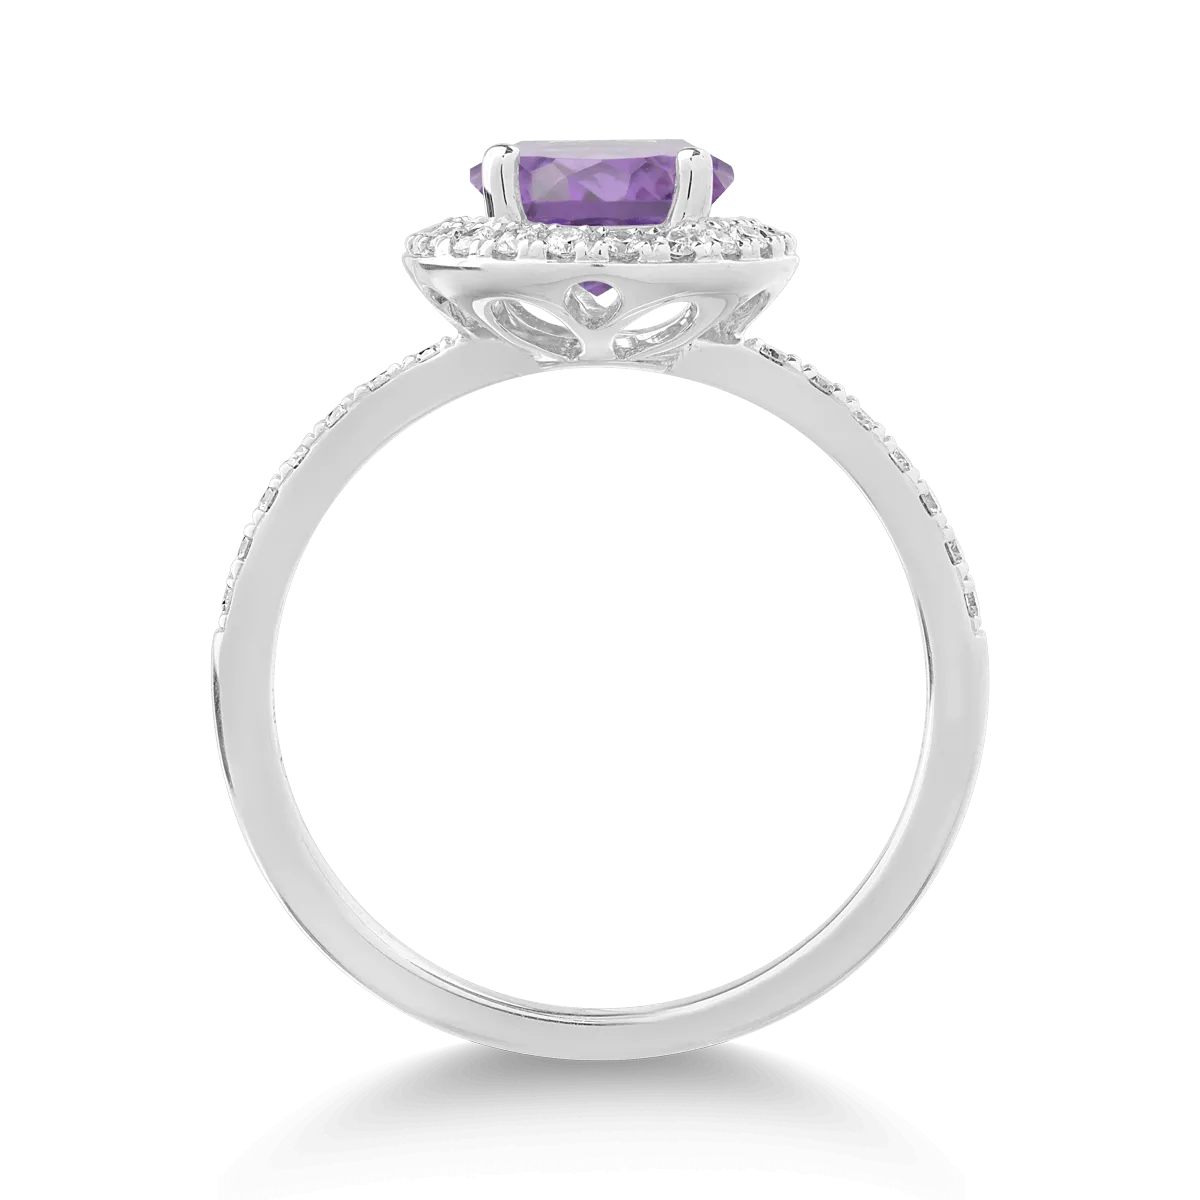 18K white gold ring with 1.98ct amethyst and 0.24ct diamonds